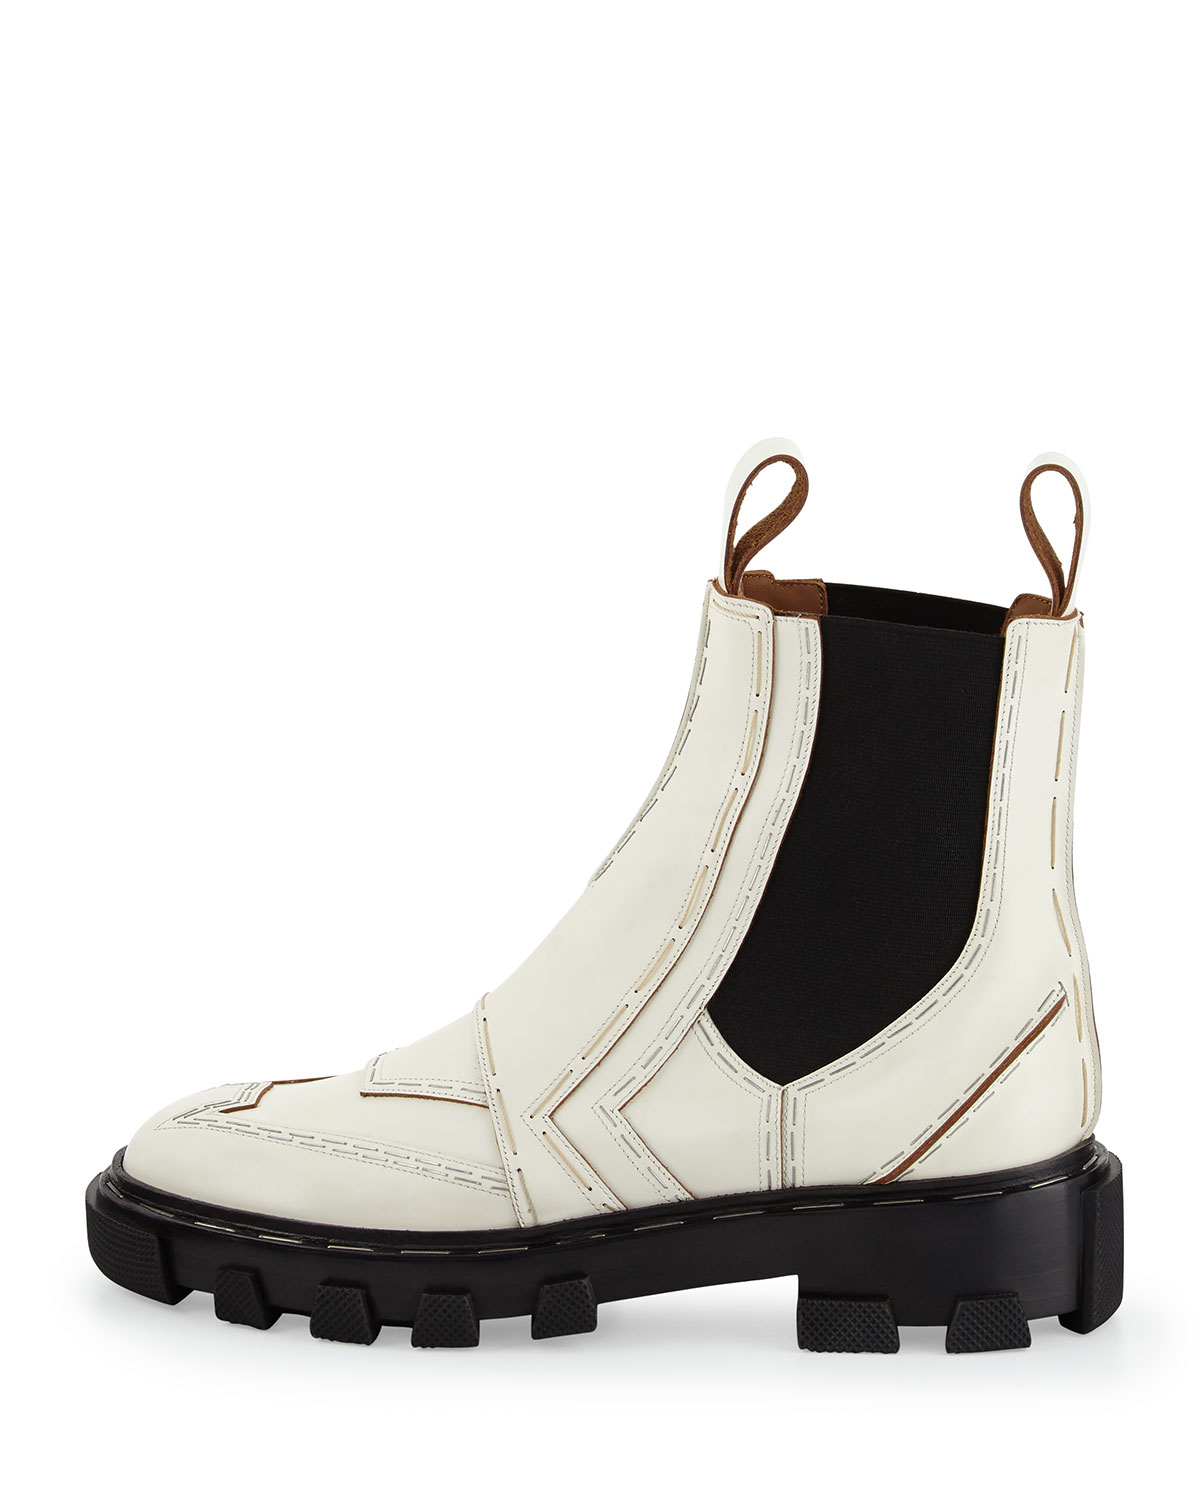 Balenciaga Stapled Leather Chelsea Boot in White | Lyst